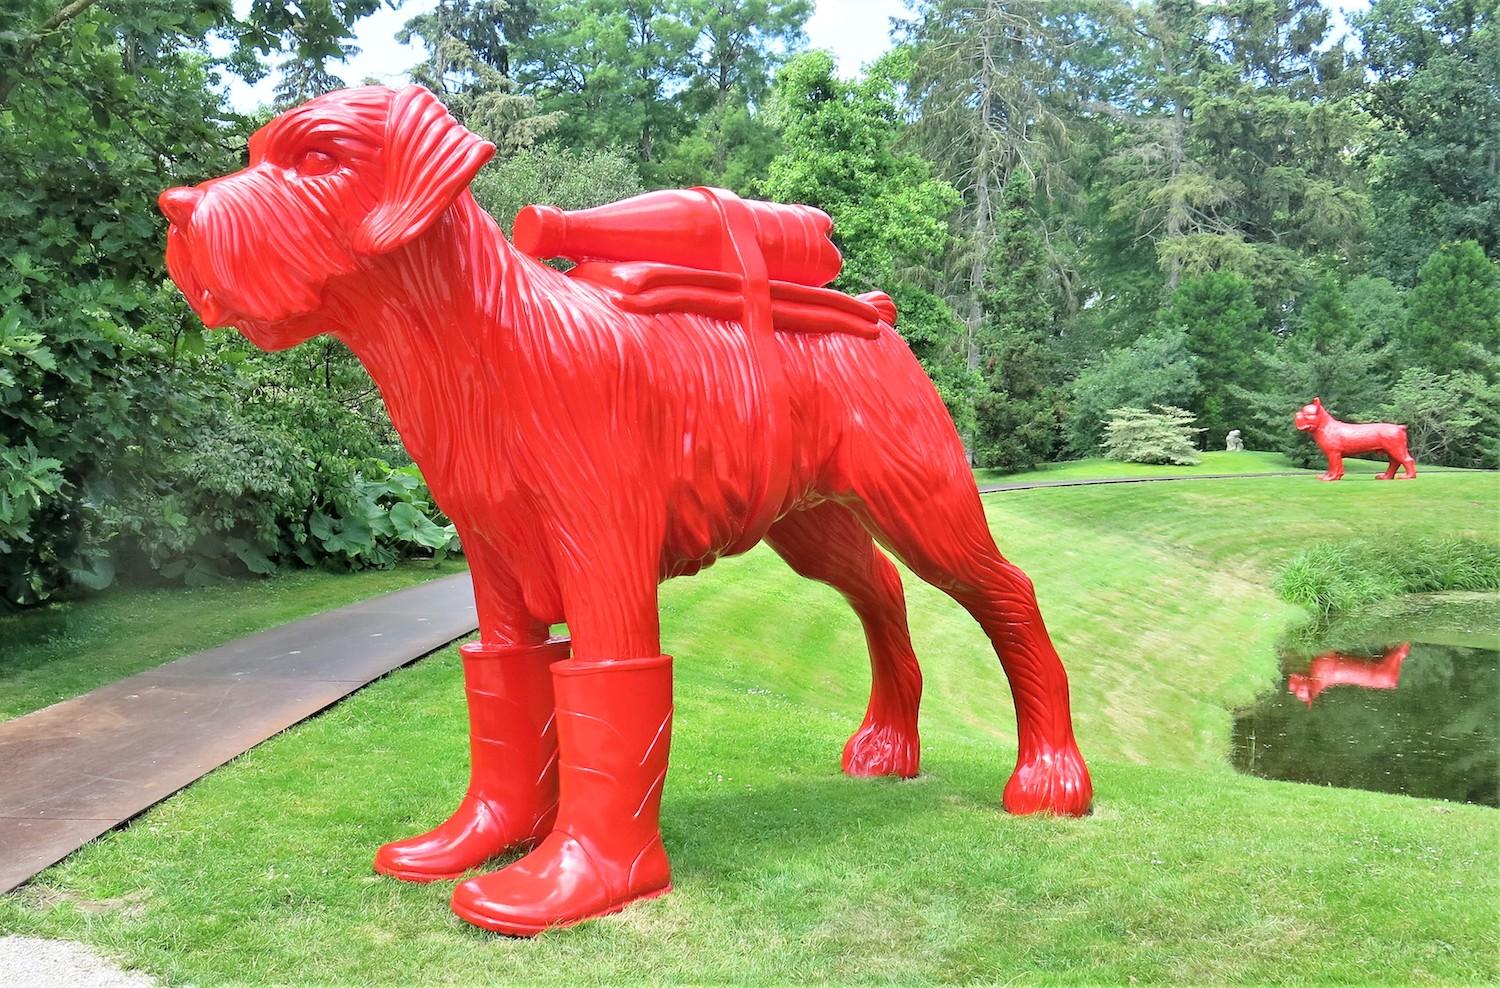 Big Cloned Schnauzer with water bottle  - Sculpture by William Sweetlove